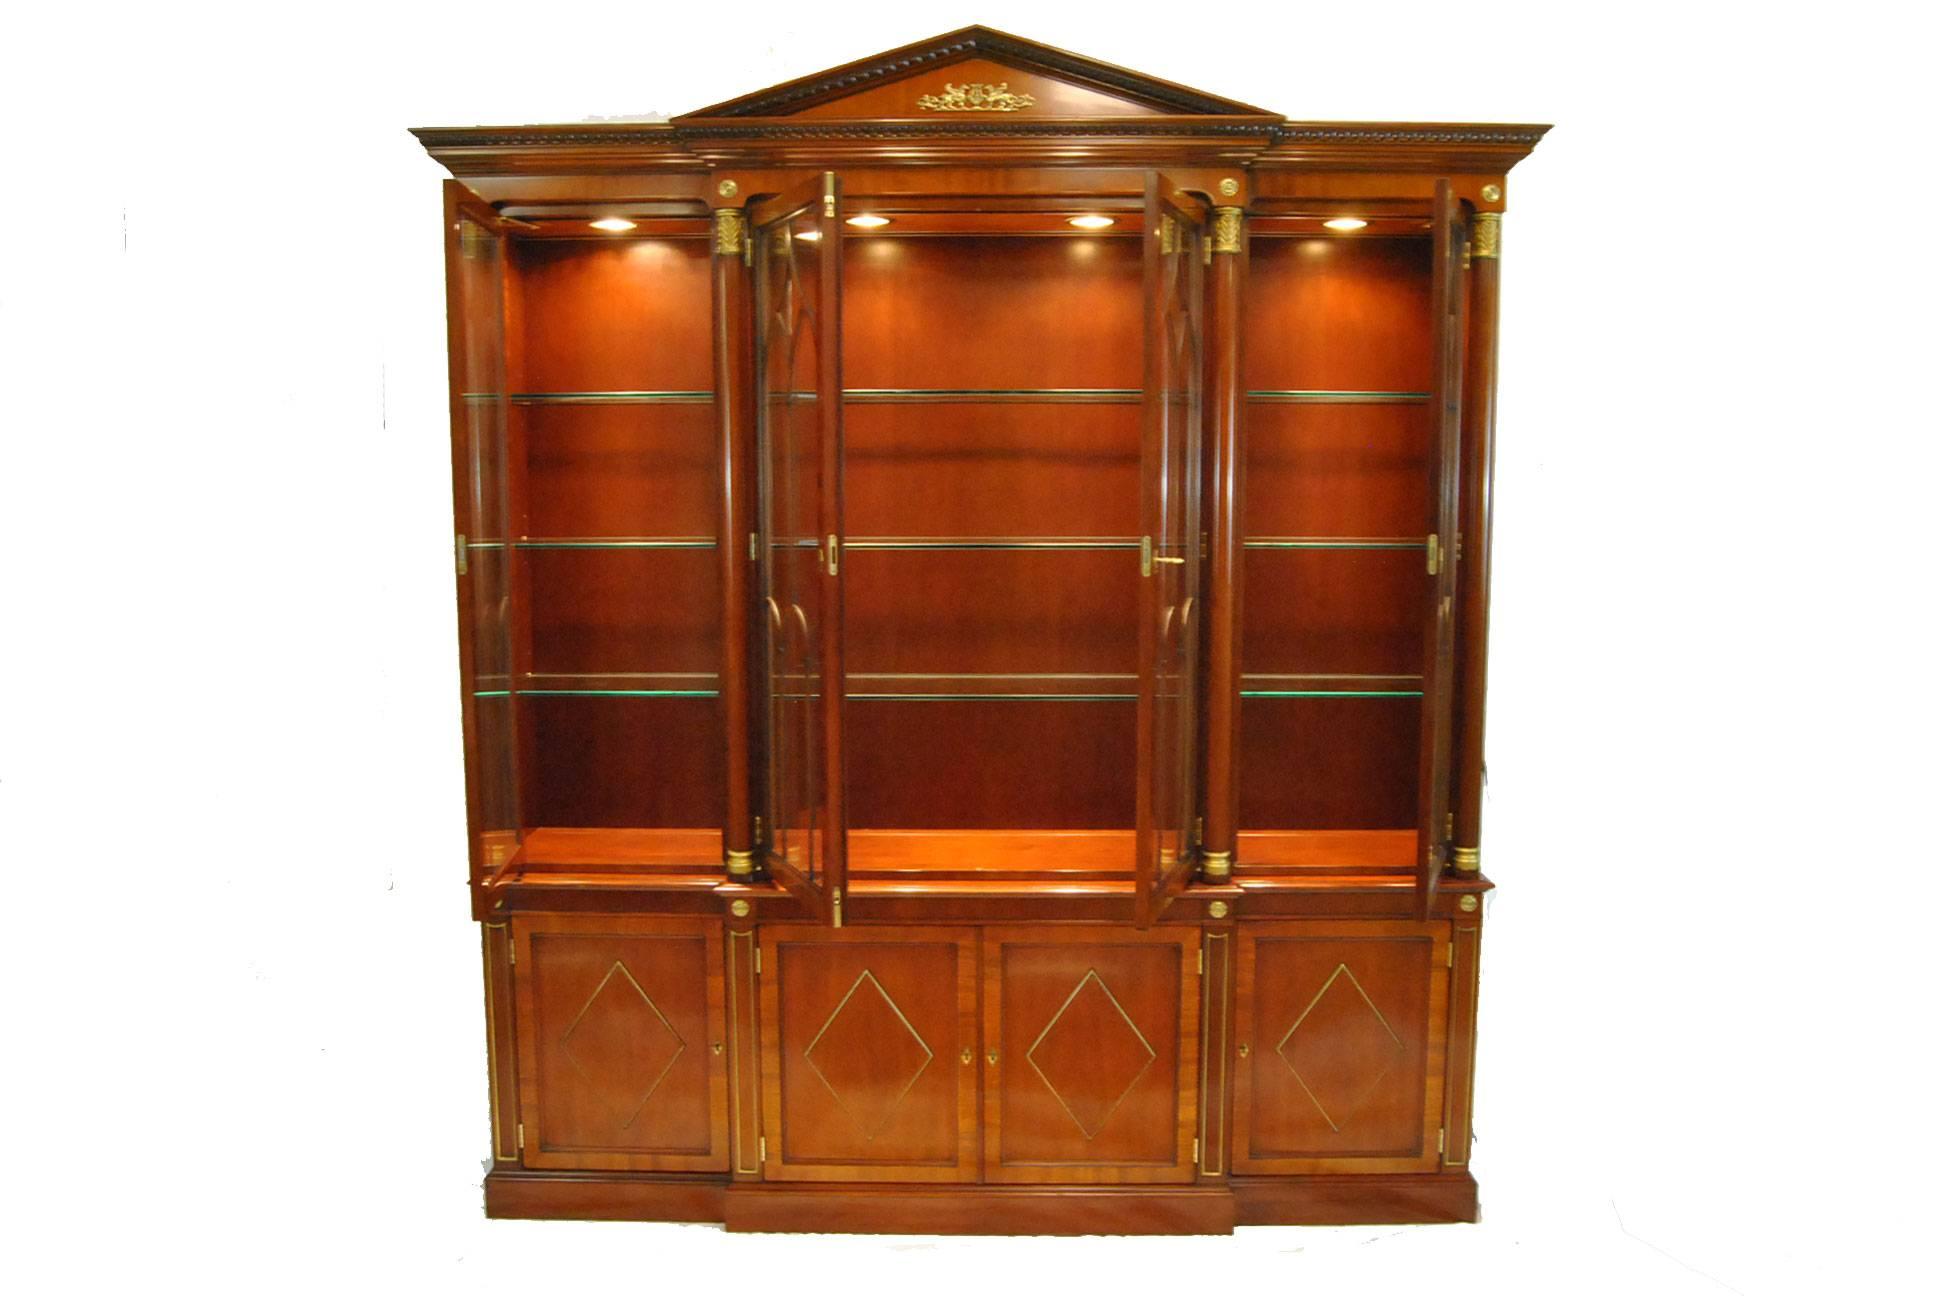 Neoclassic Mahogany Breakfront with crown molding inset with a carved egg and dart molding; Four half-rould columns are topped by hand carved capitals.
4 glass paneled doors over four diamond patterned doors; omolu mounts,rosettes and escutcheons